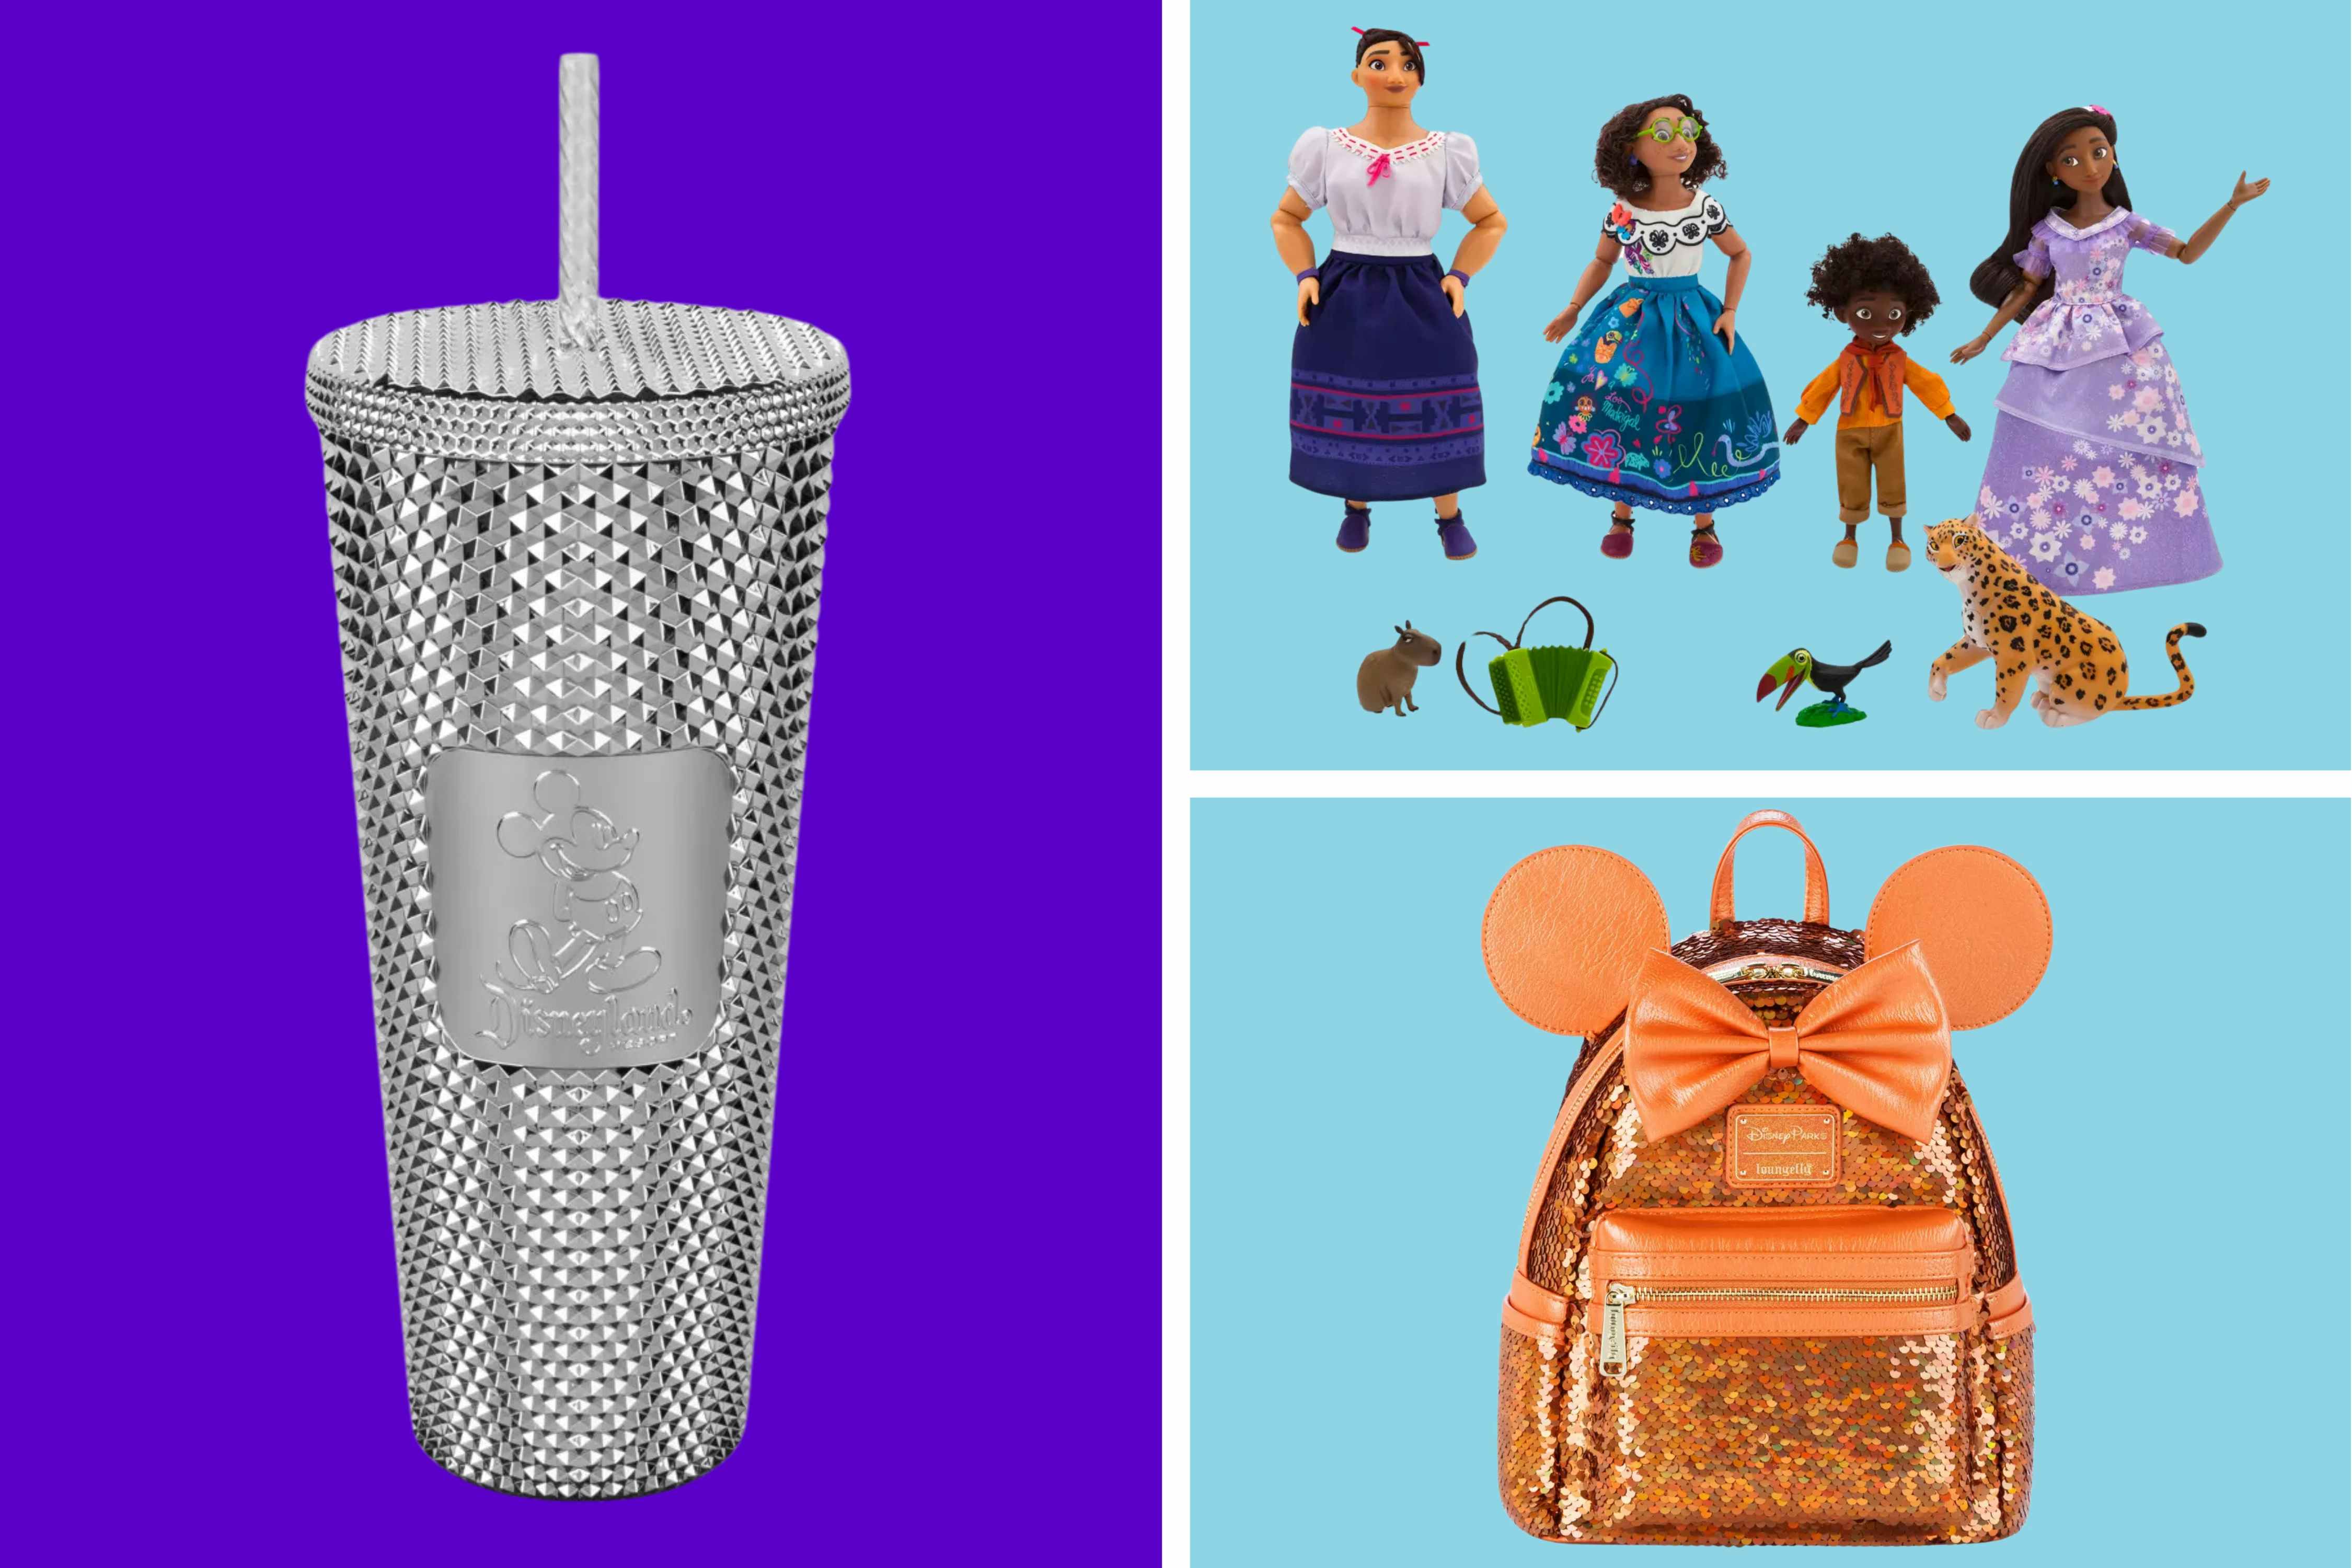 Hot Disney Deals: $13 Starbucks Tumbler, $50 Loungefly Backpack, and More